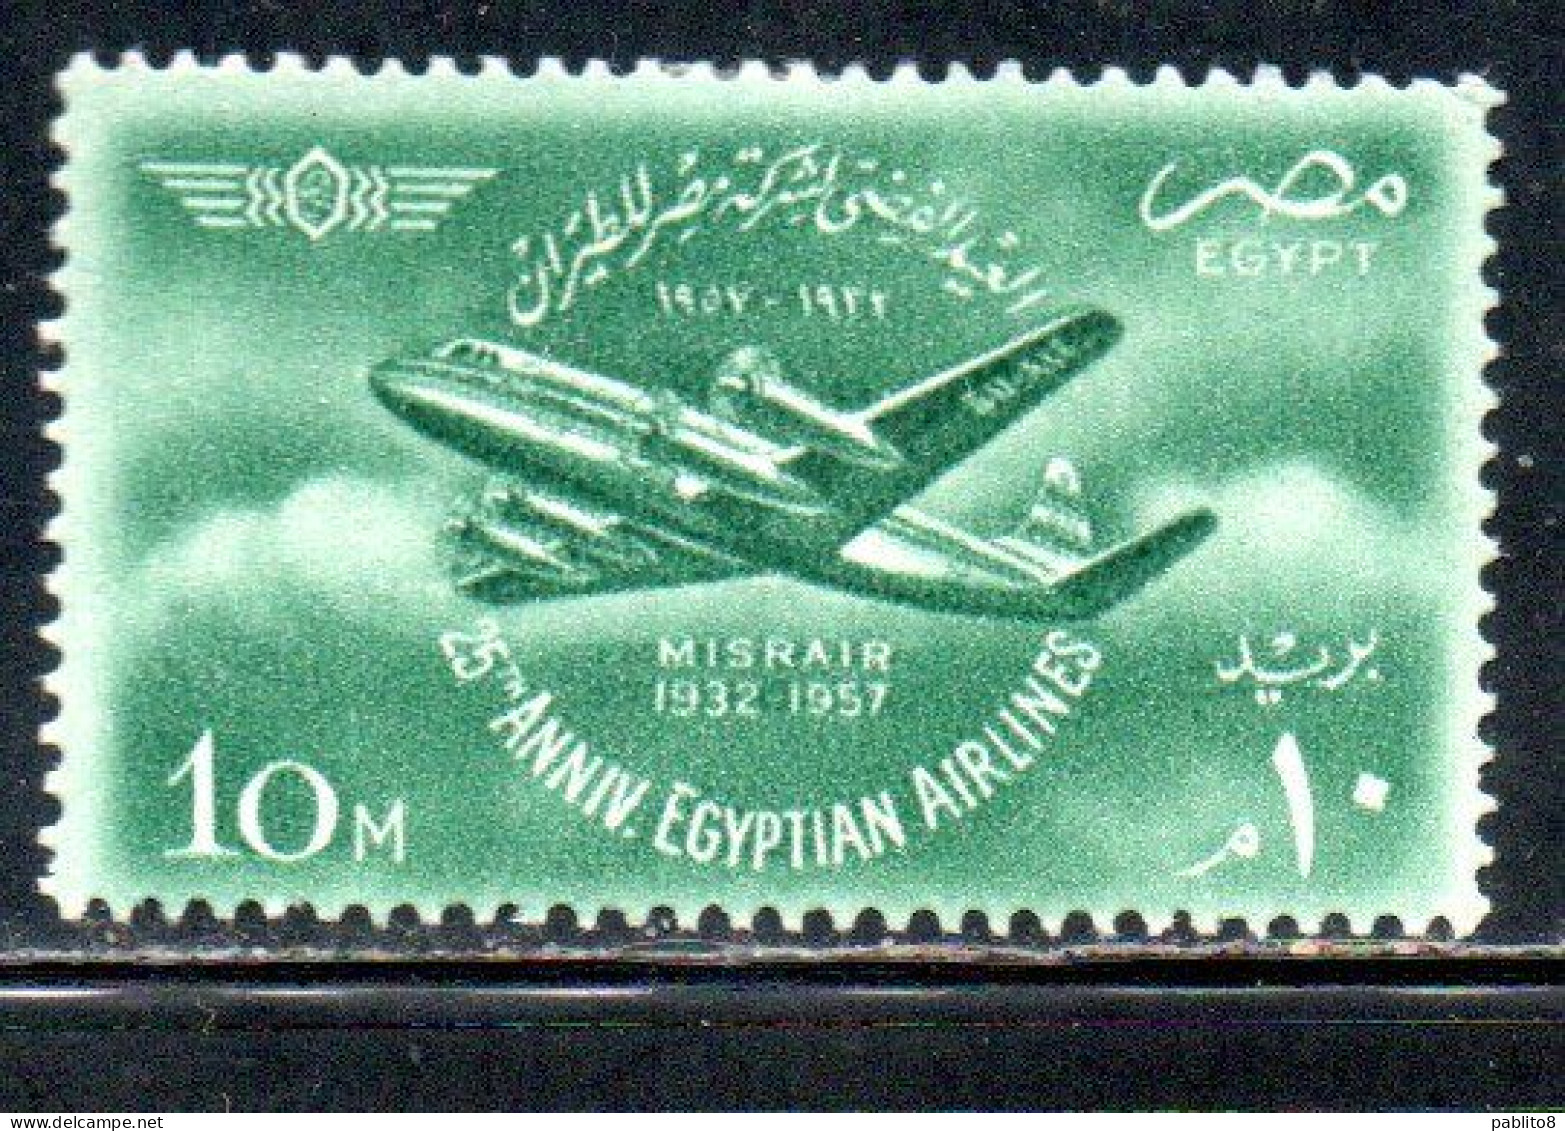 UAR EGYPT EGITTO 1957 EGYPTIAN AIR FORCE AND OF MISRAIR AIRLINE VISCOUNT PLANE 10m MH - Unused Stamps